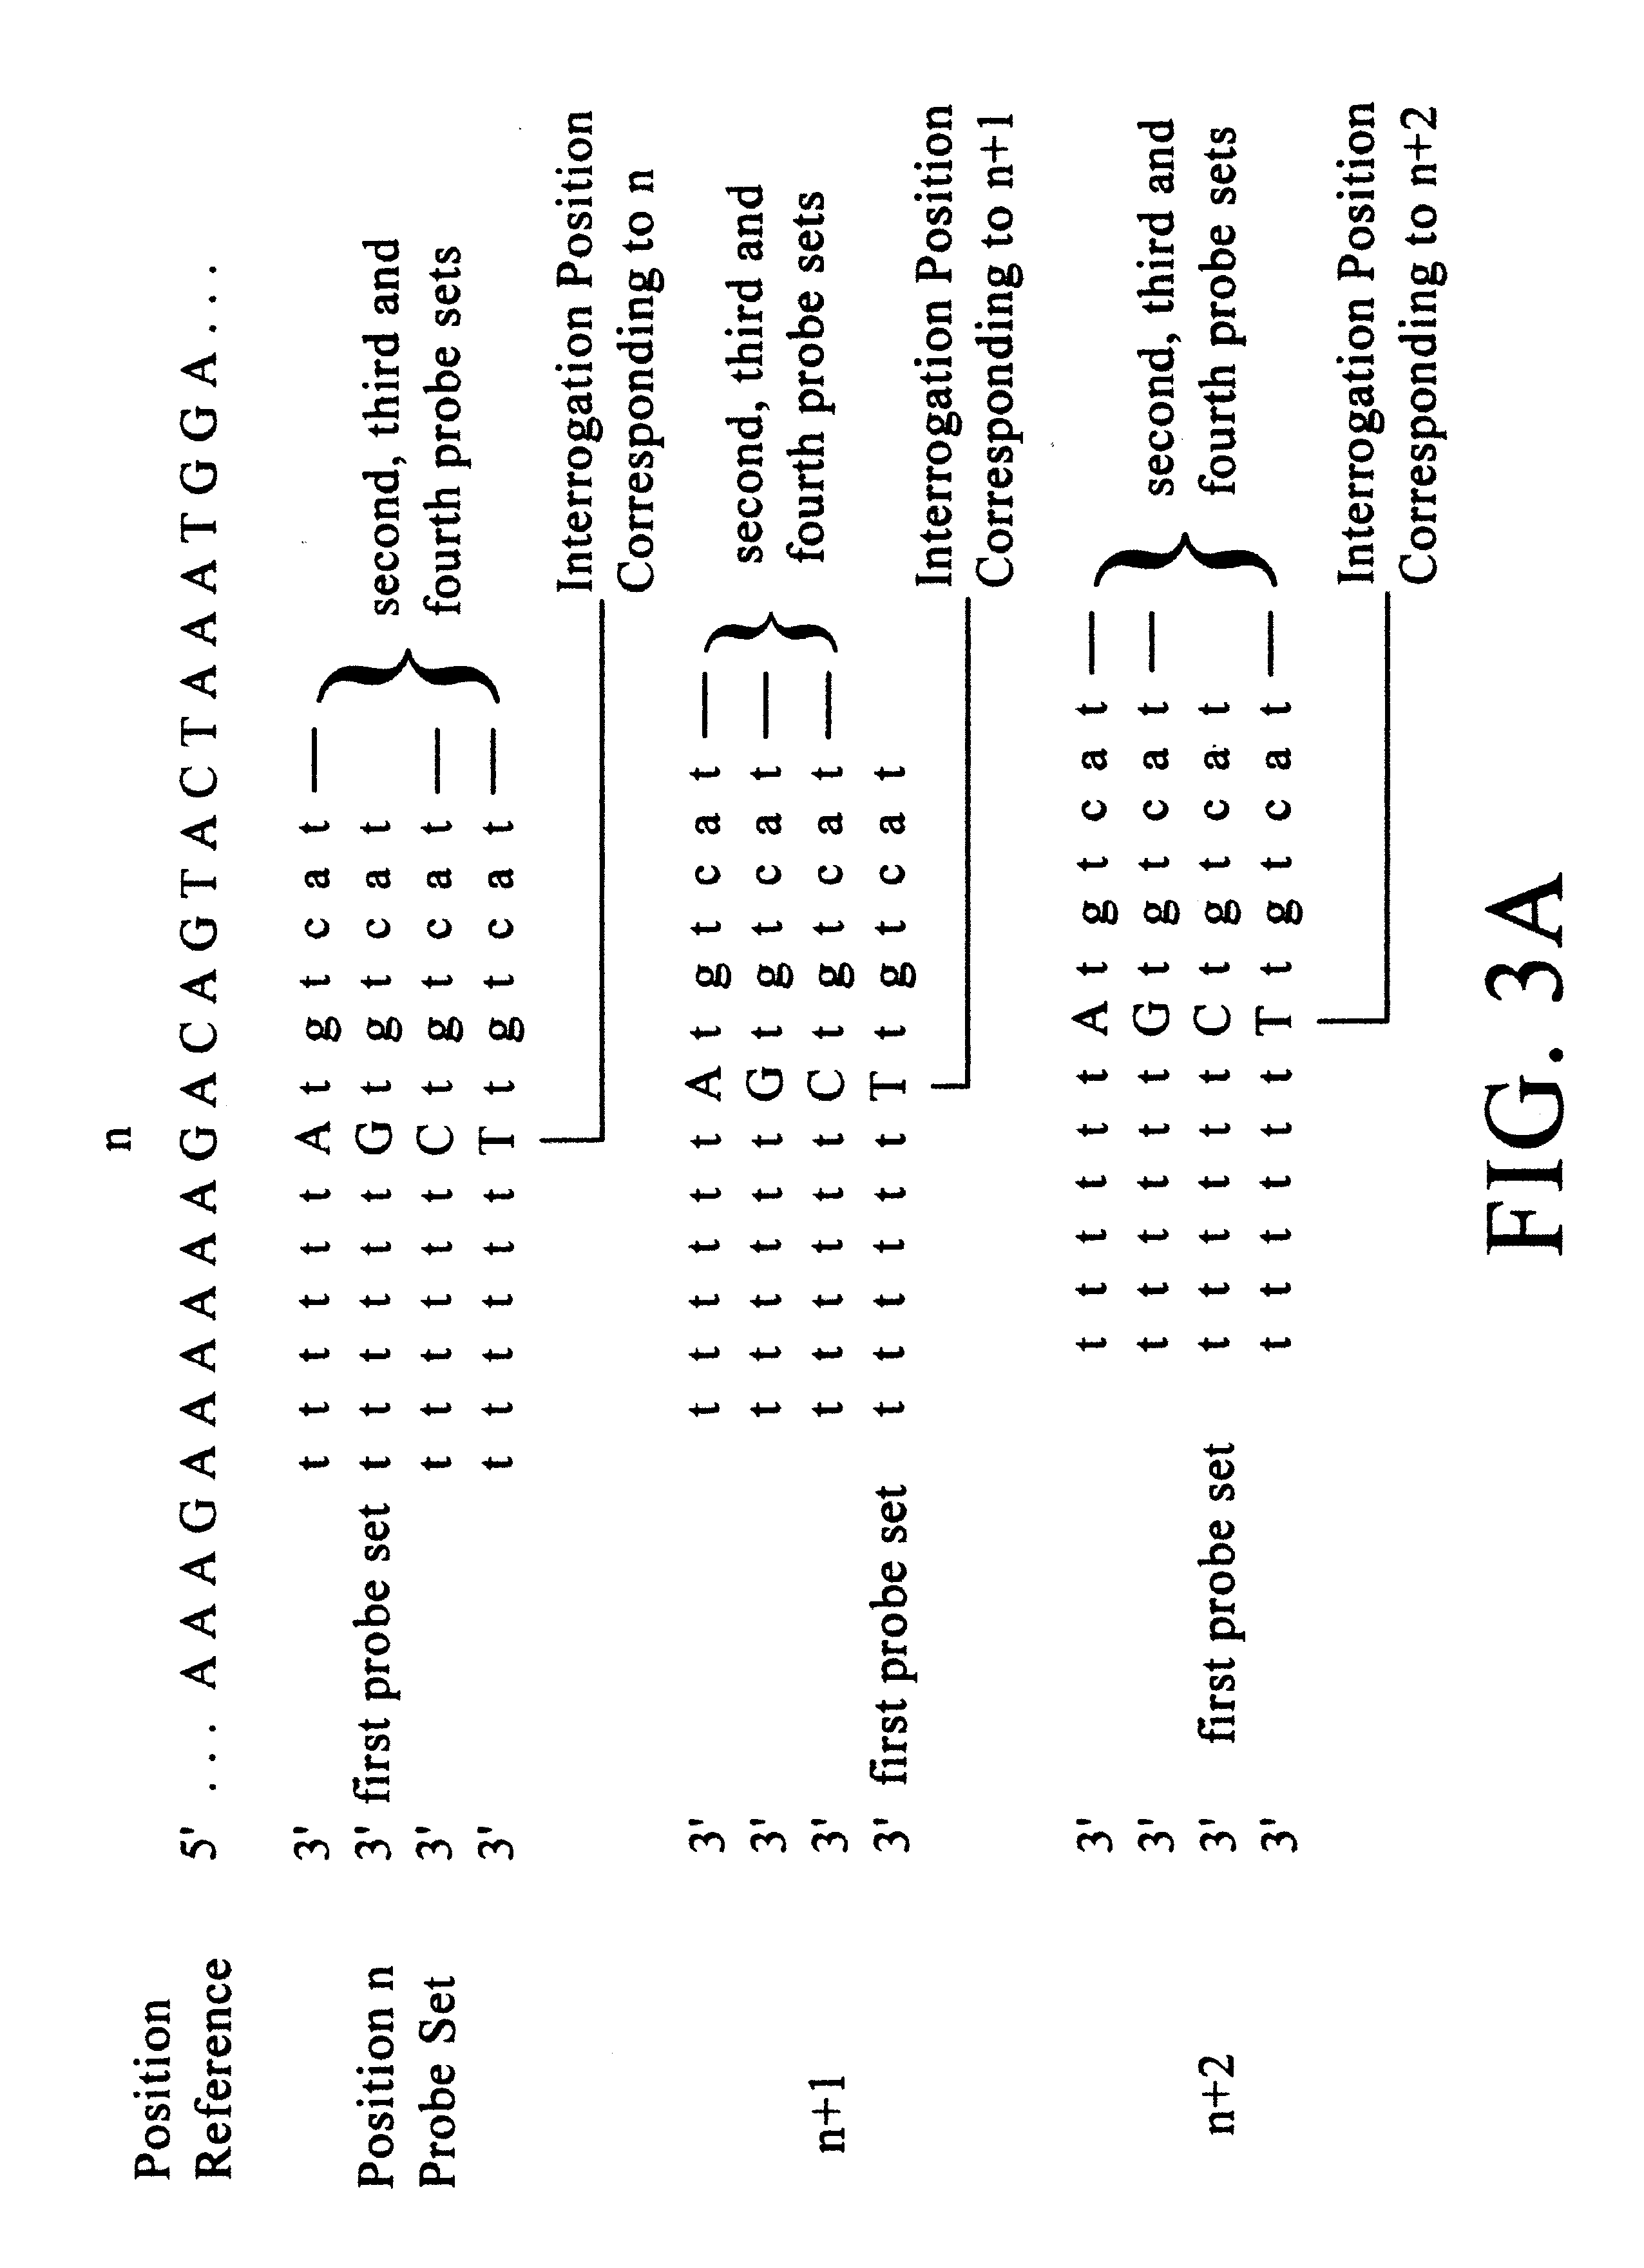 Analysis of genetic polymorphisms and gene copy number